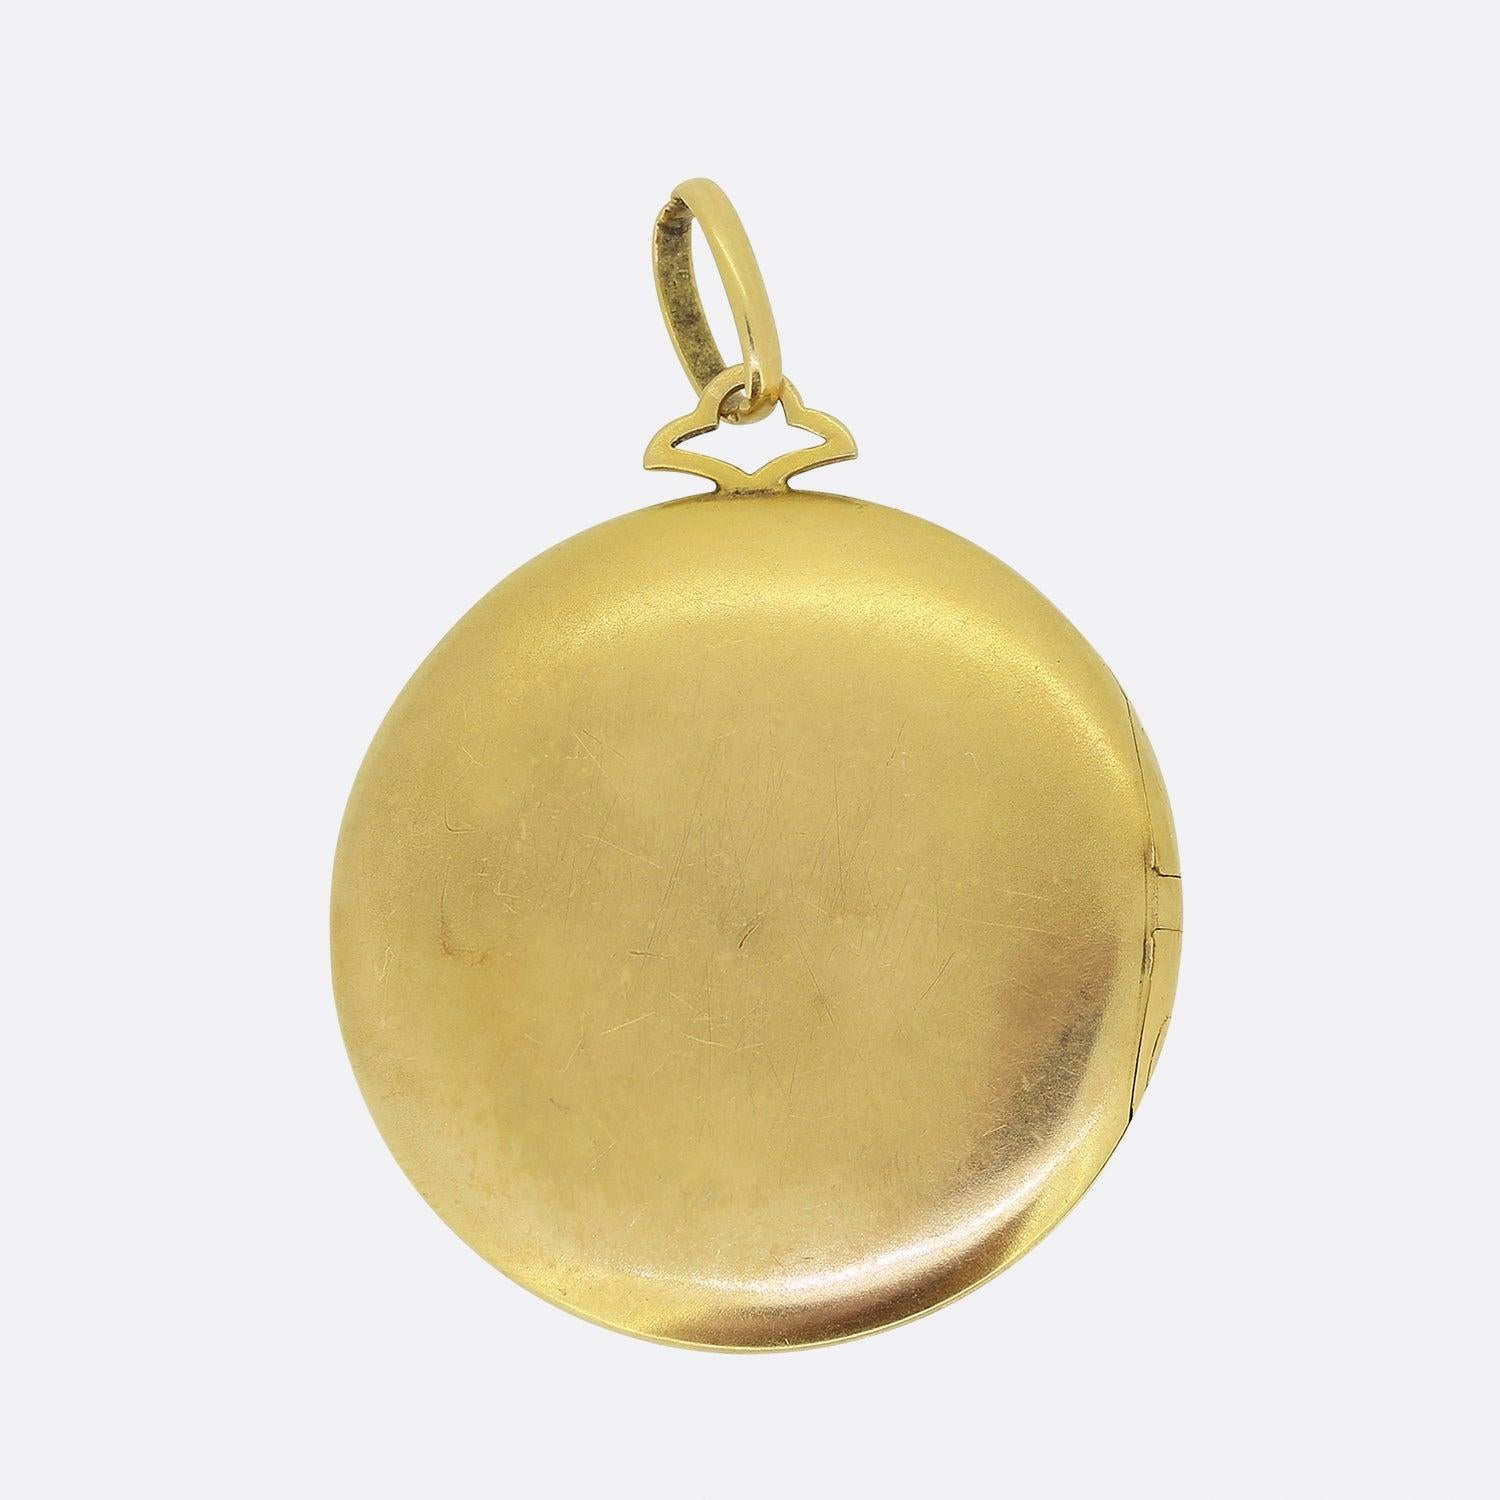 Here we have a charming locket pendant showcasing the fabulous decorative art we have come to associate with the Art Nouveau style and period. This piece has been crafted from 18ct yellow gold into a circular shape and set with a centralised cluster